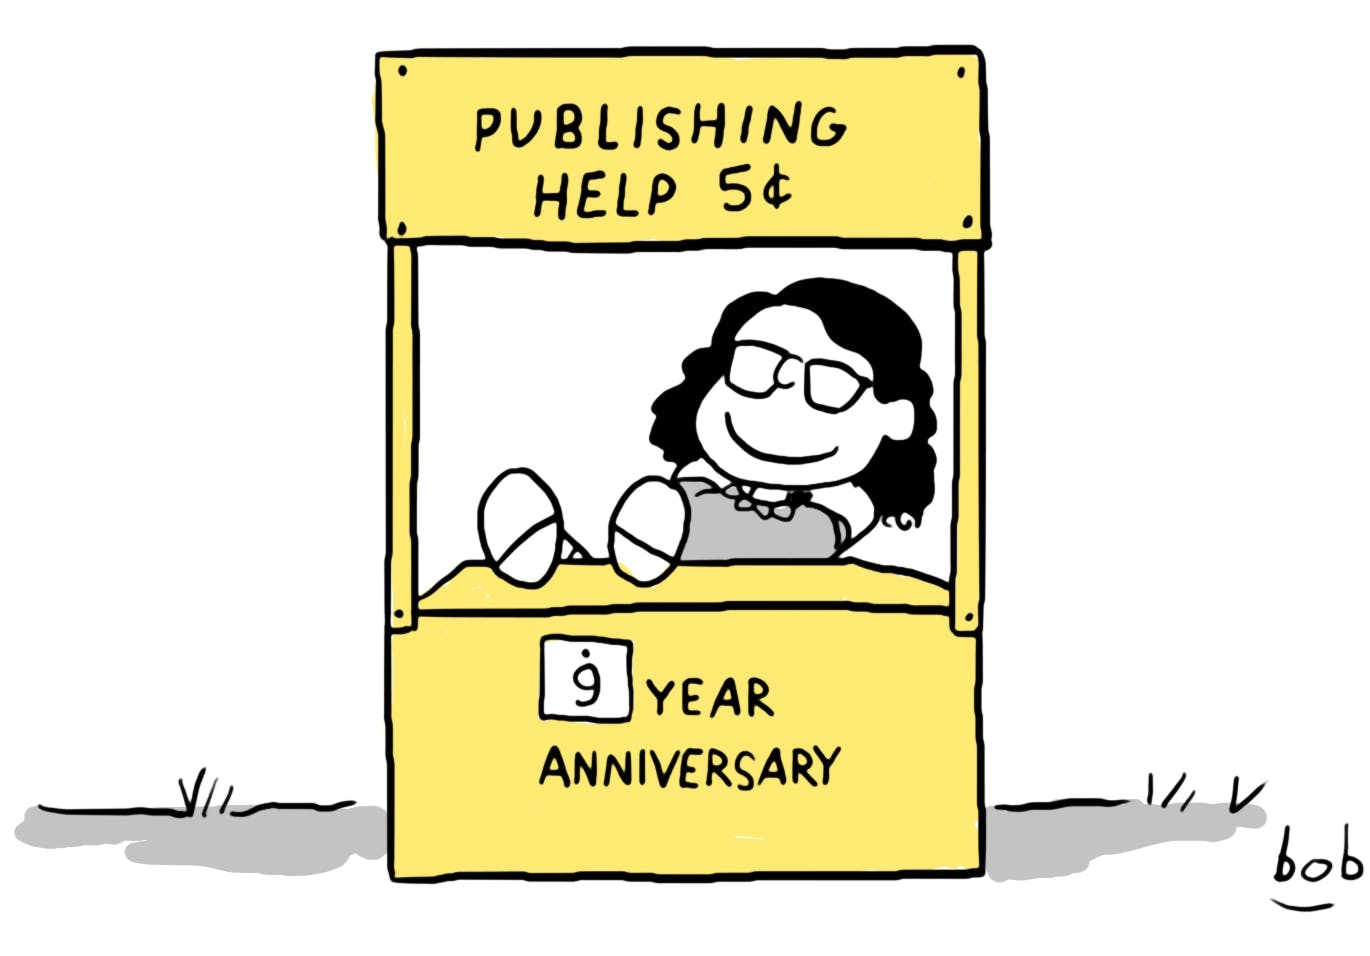 Cartoon: In the style of Lucy Van Pelt's "The psychiatrist is in" booth from Peanuts, Jane Friedman sits with her feet up at a booth labeled "Publishing help 5 cents. 9 year anniversary."